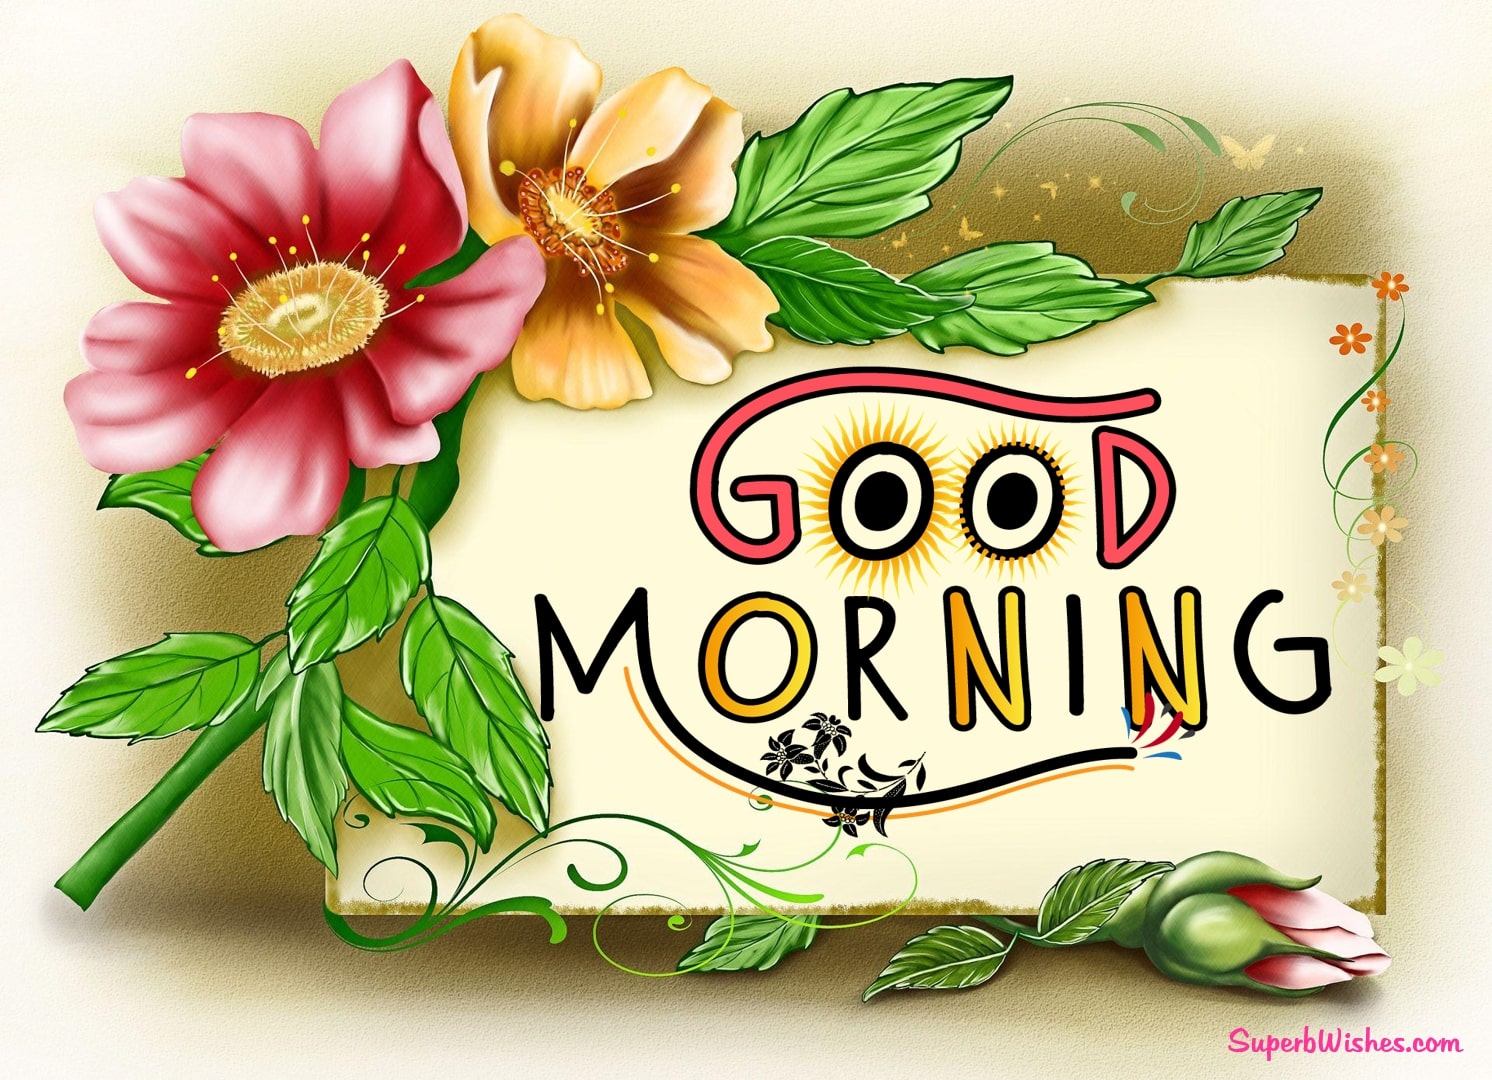 Lovely good morning picture. Superbwishes.com